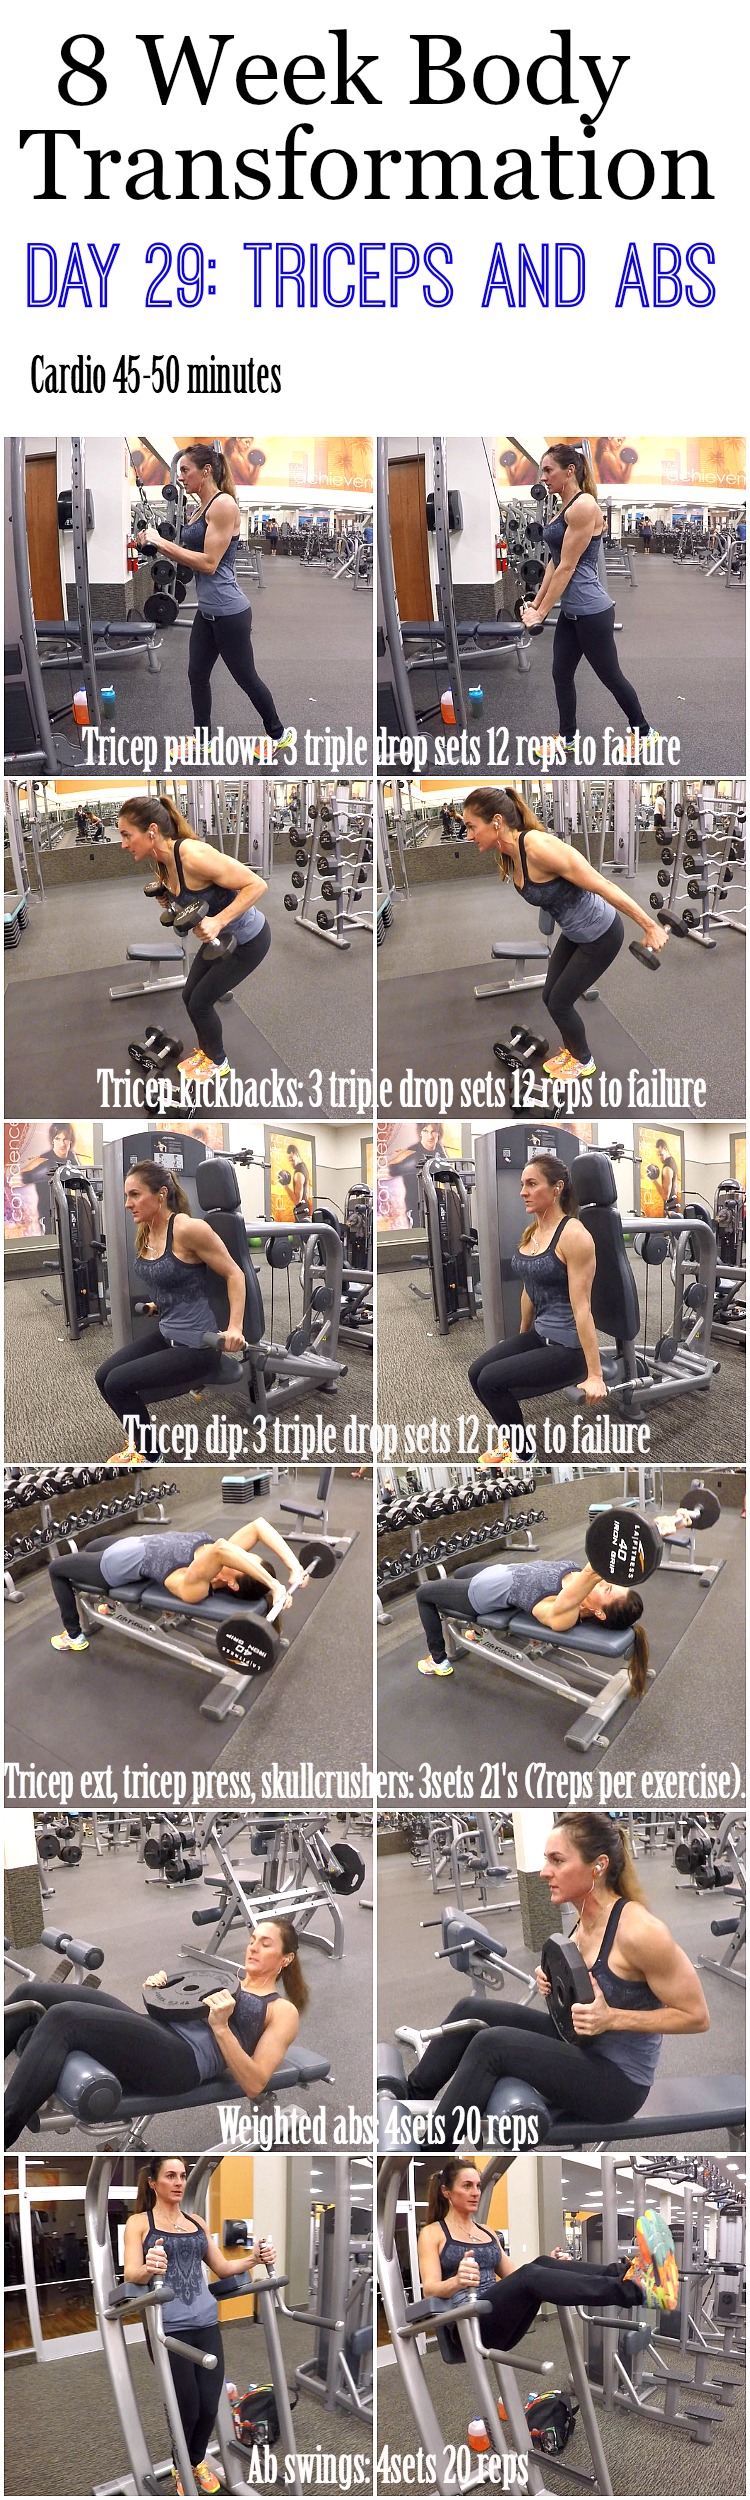 8 Week Body Transformation: Day 29 Triceps and Abs ...